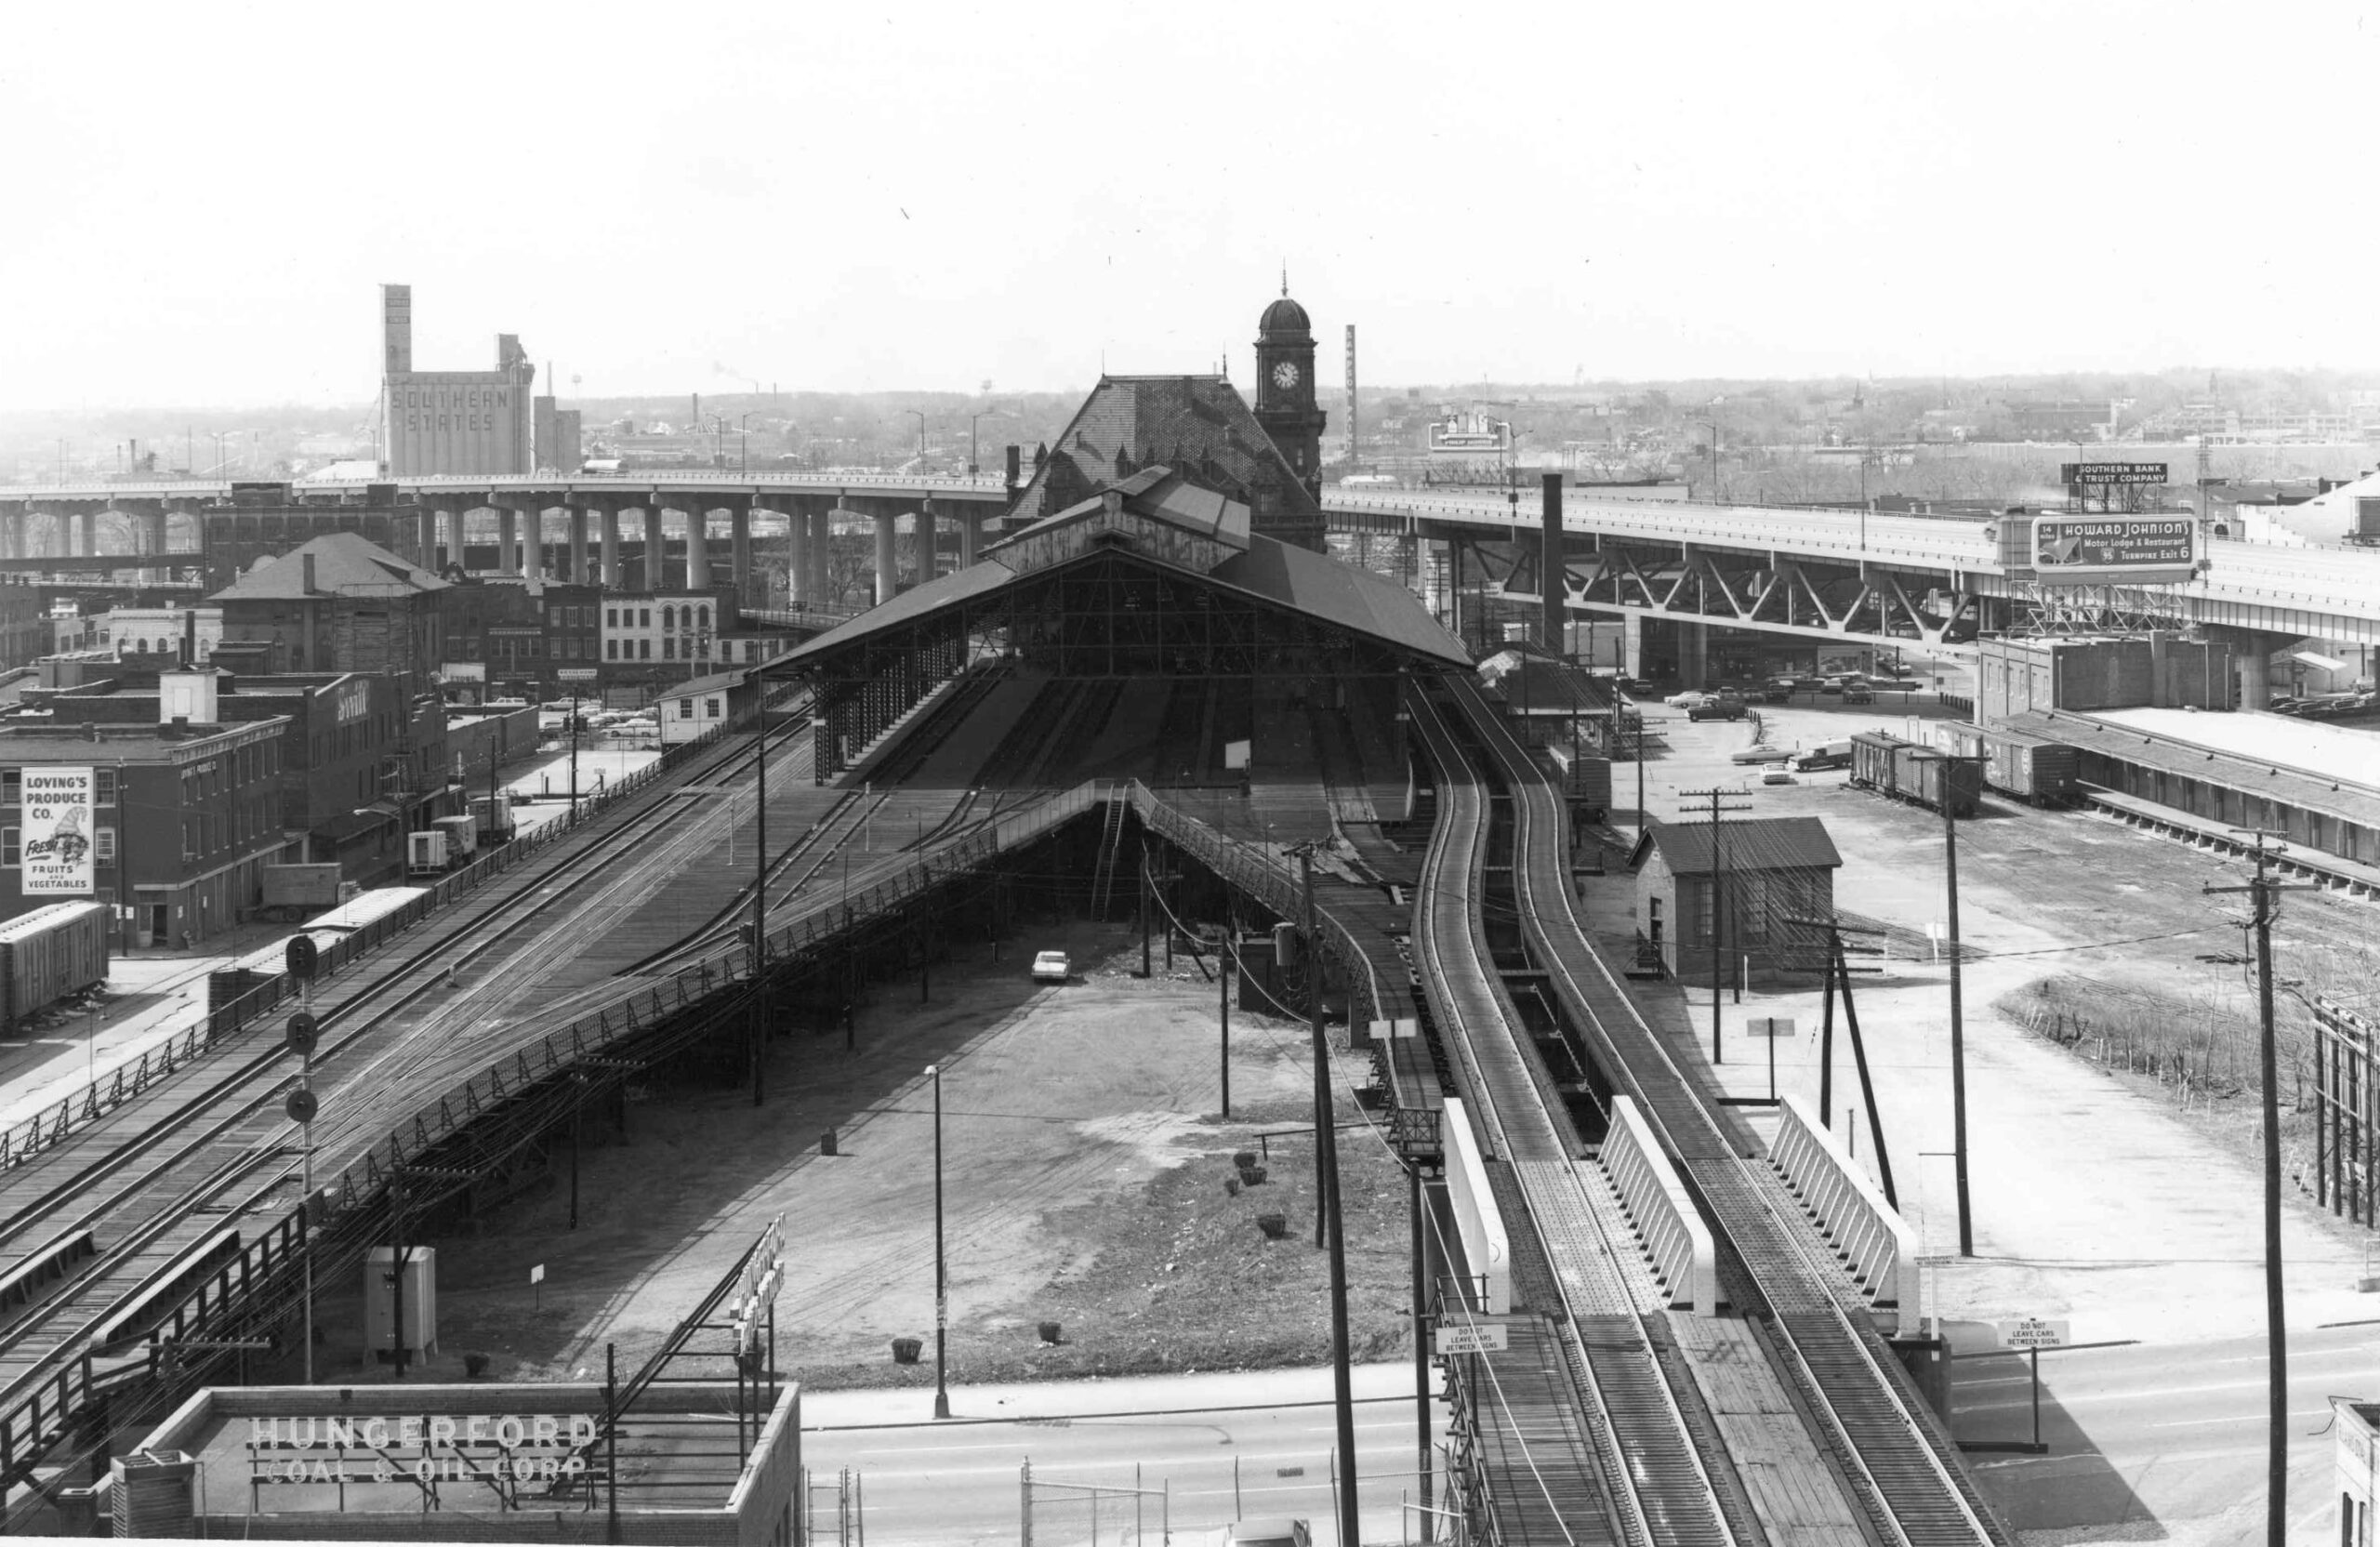 Trainshed, General View North. Photo credit: DHR, 1972